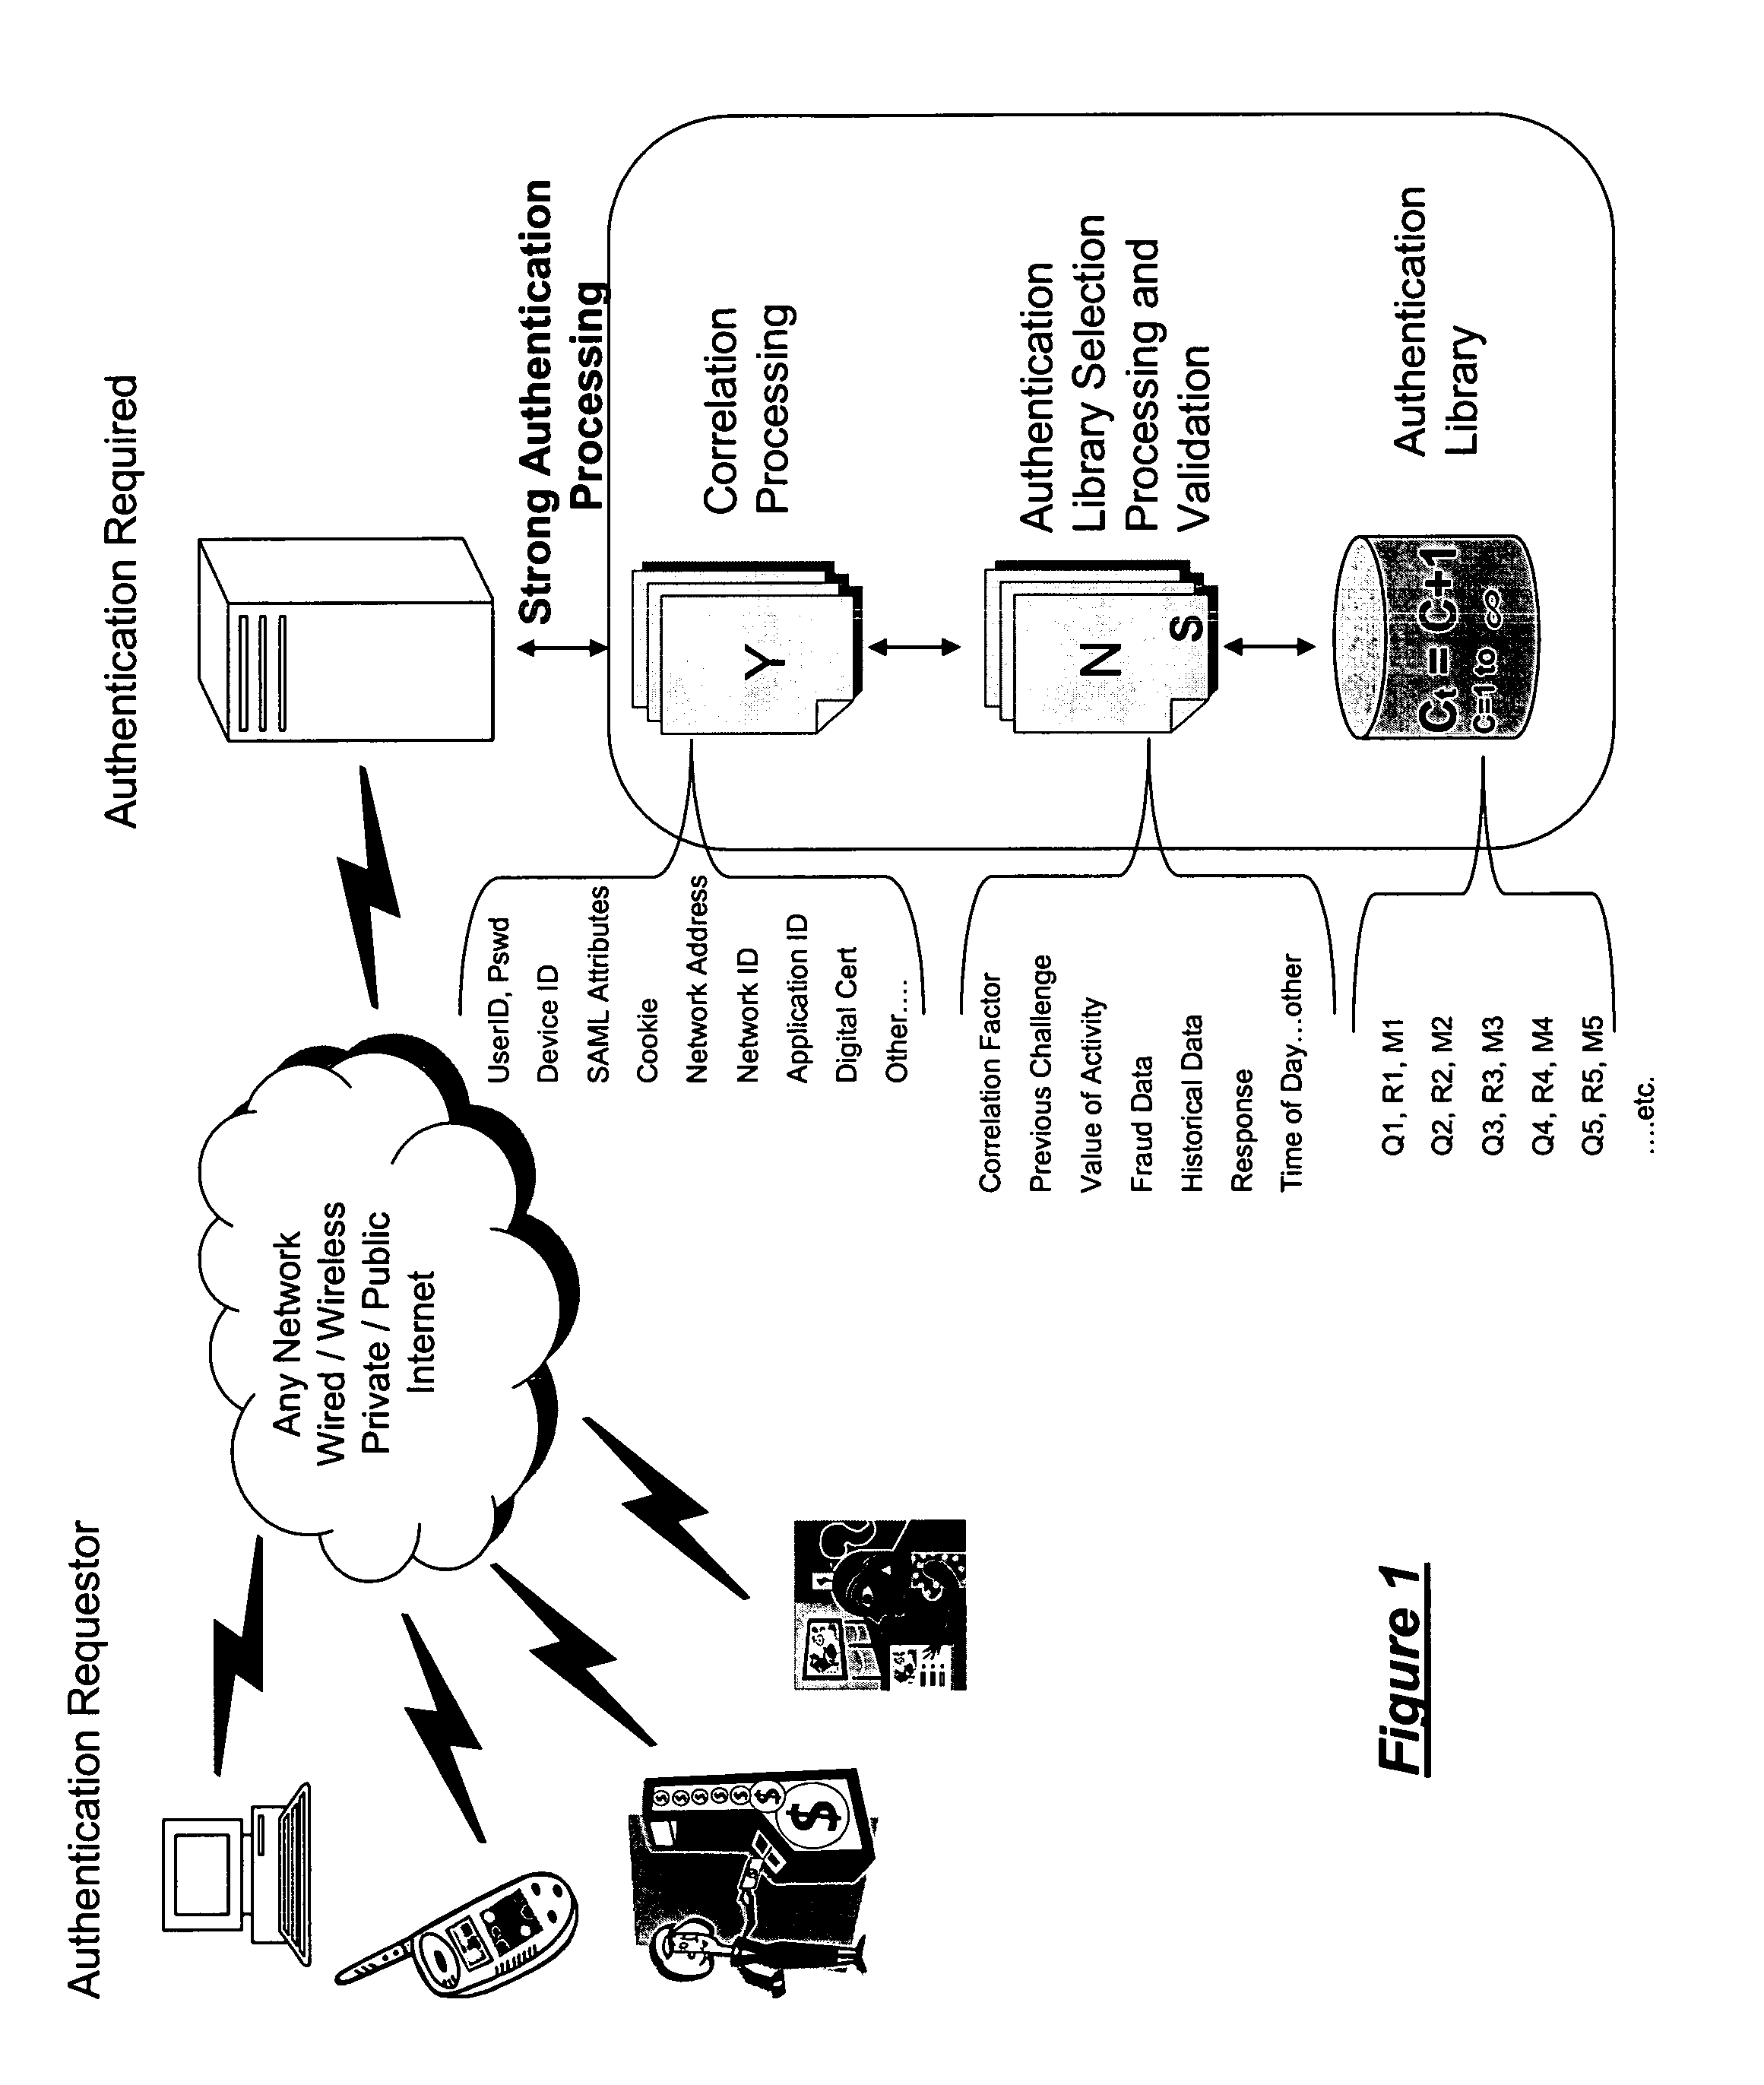 Common authentication service for network connected applications, devices, users, and web services